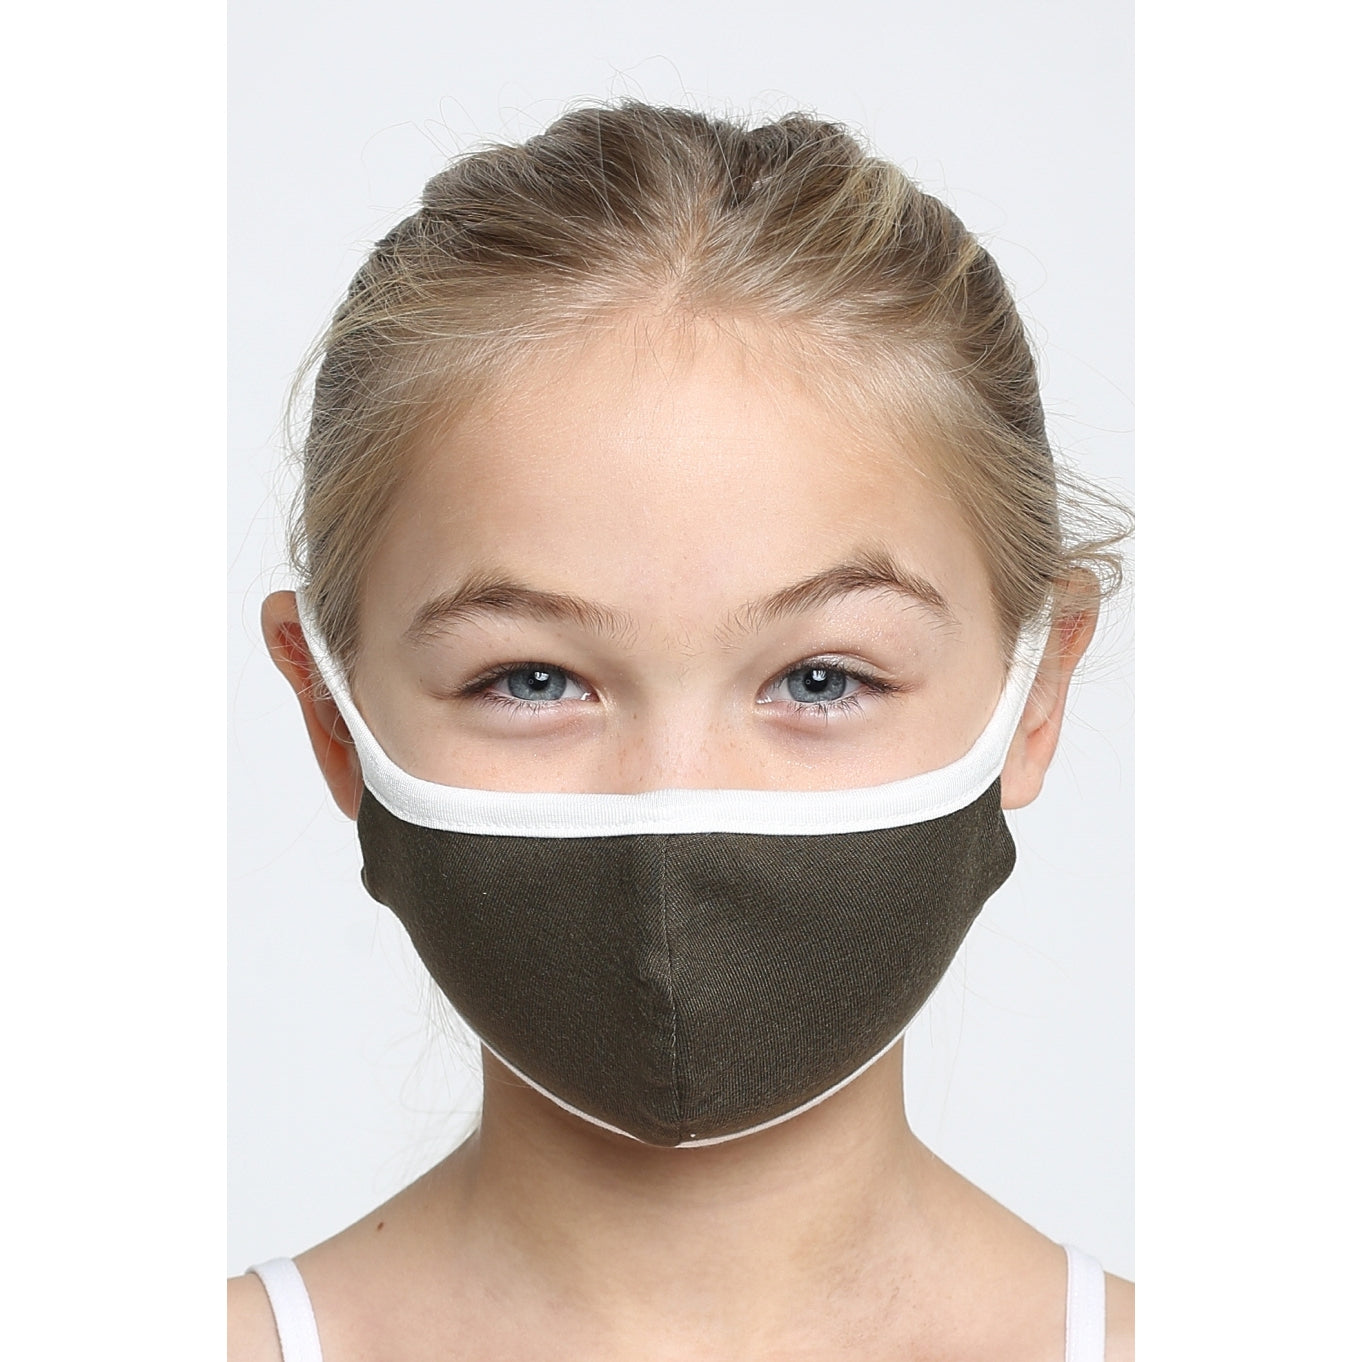 Acting Pro Fabric Face Mask for Kids (6 color options)